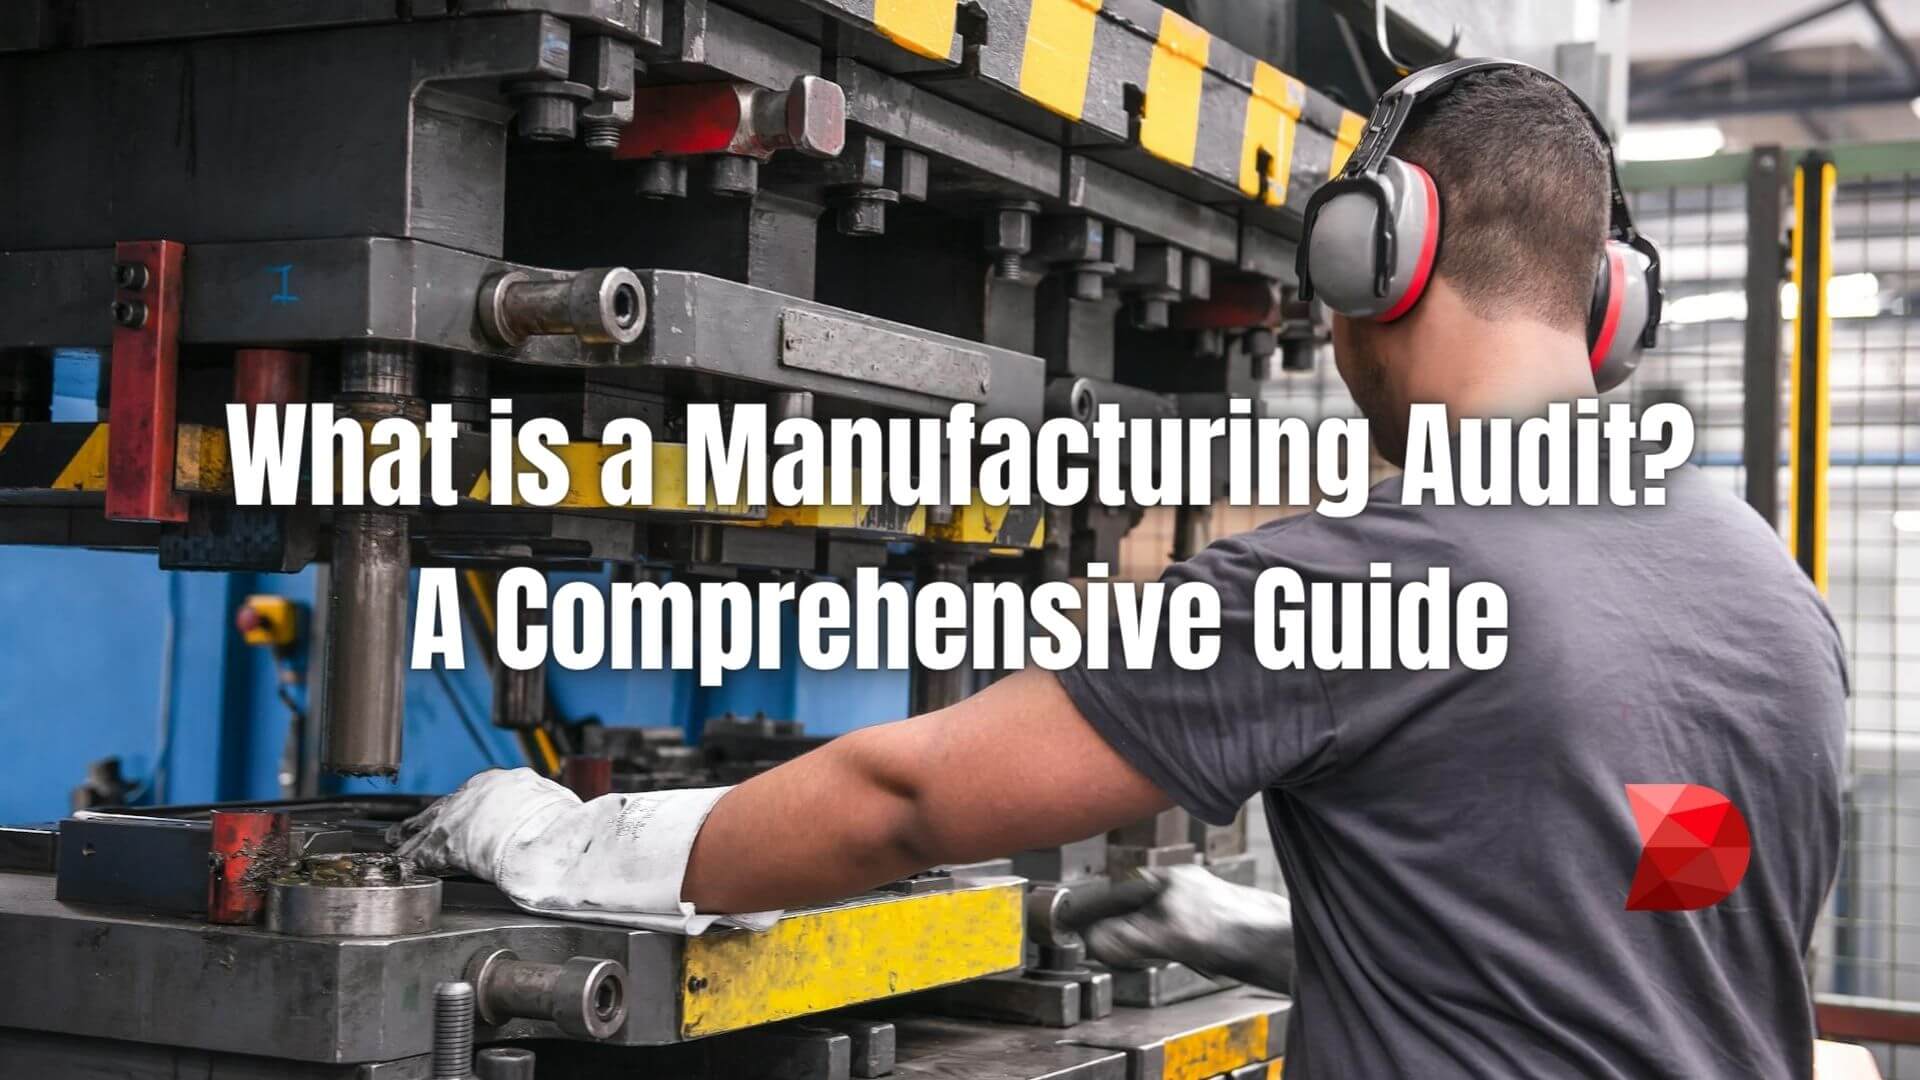 Unlock the secrets of manufacturing audits with our guide. Learn what they are, why they matter, and how to conduct them effectively.